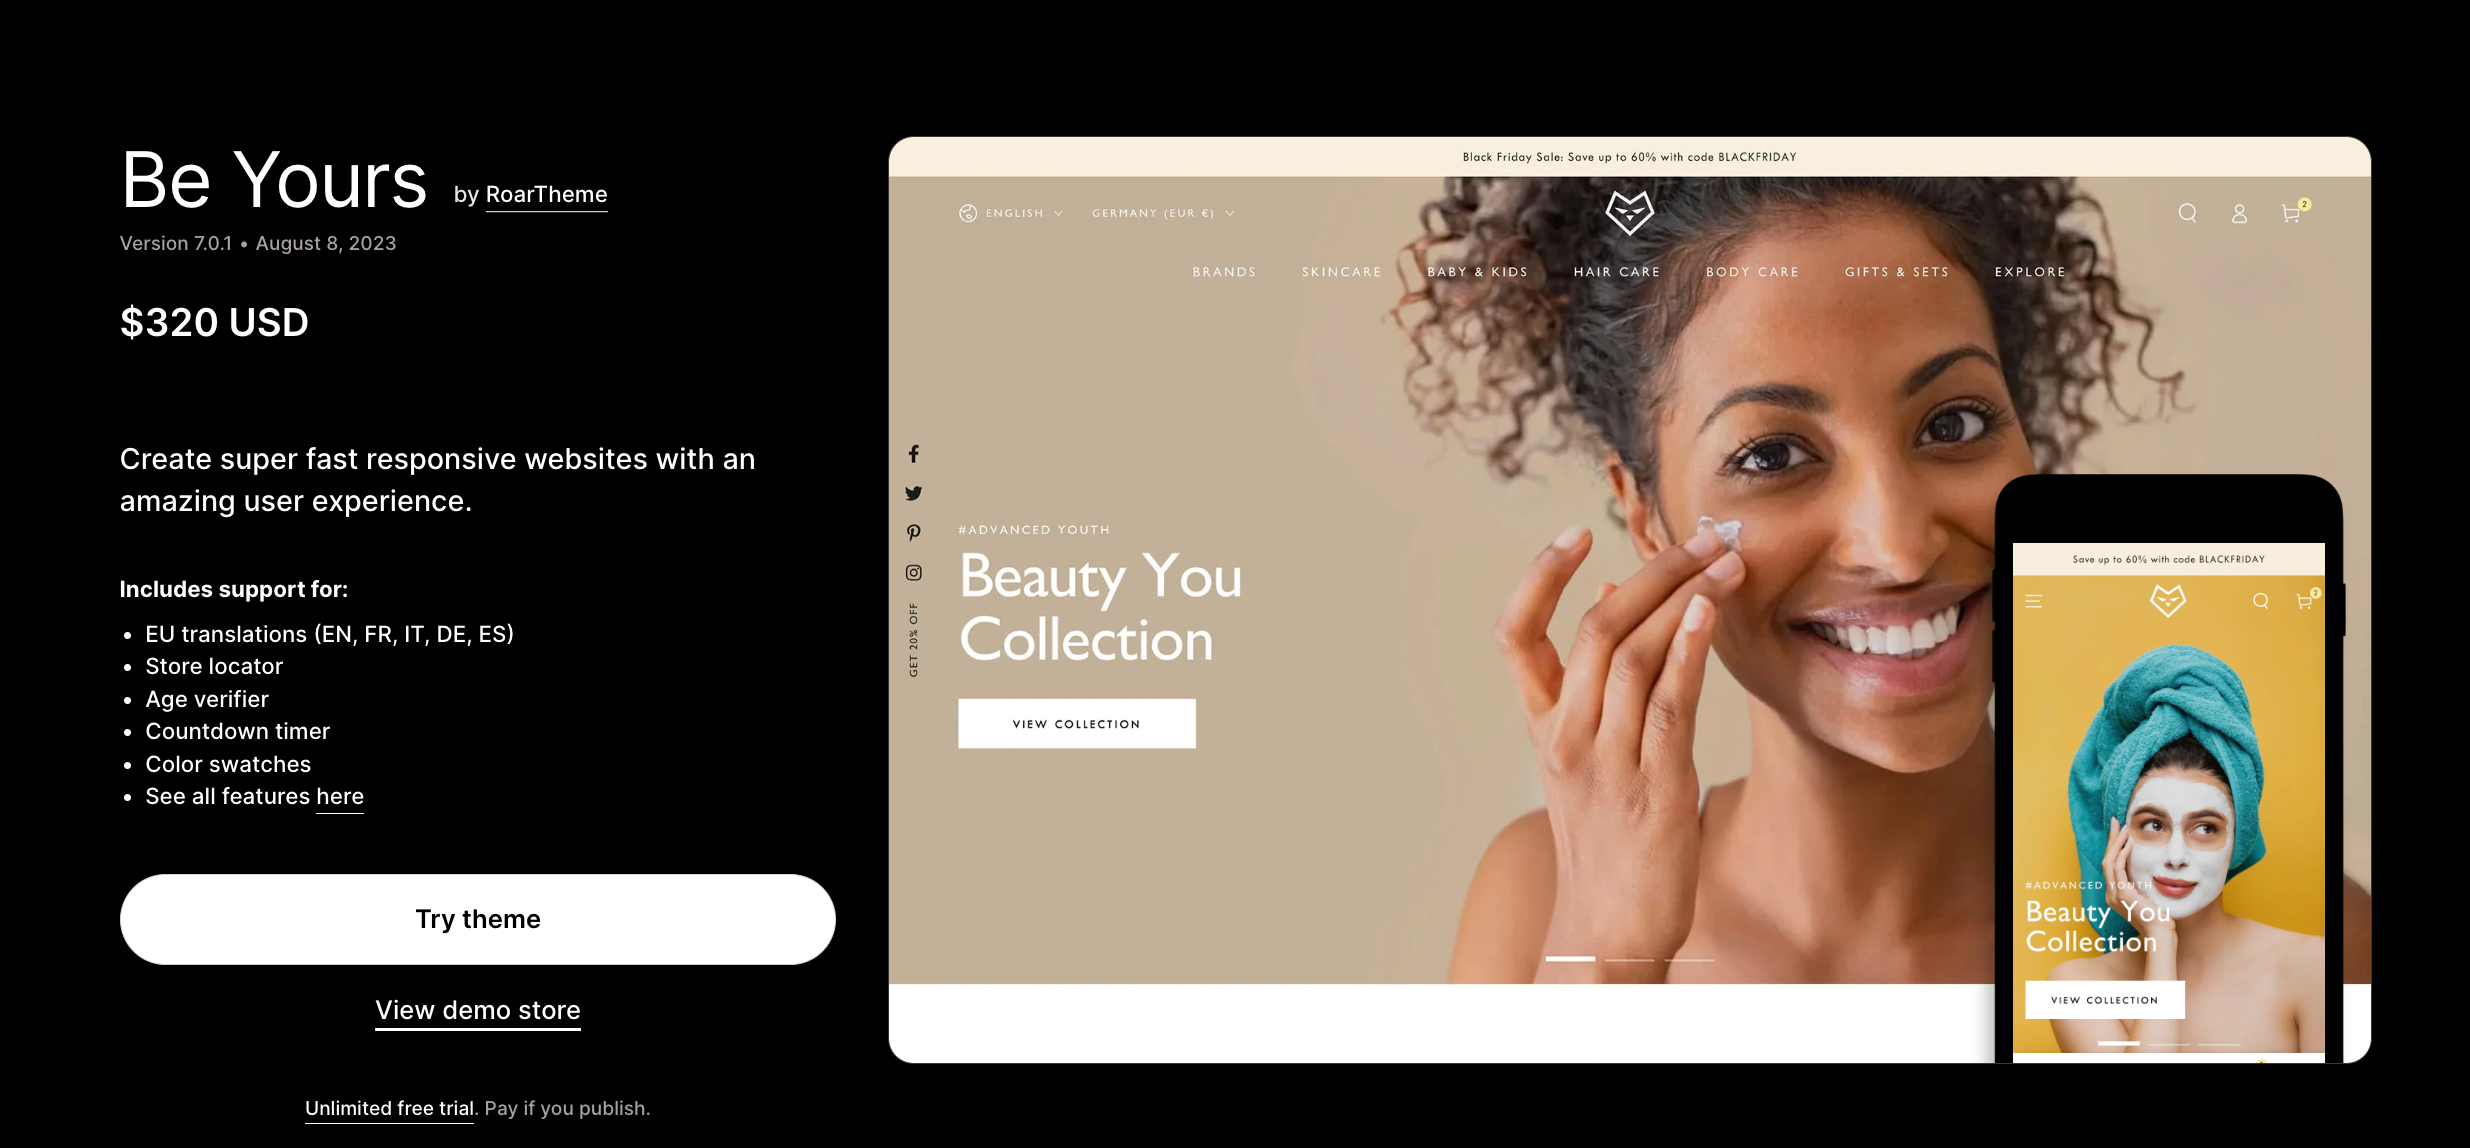 The Be Yours Shopify theme is a versatile and adaptable template ideal for various clothing businesses